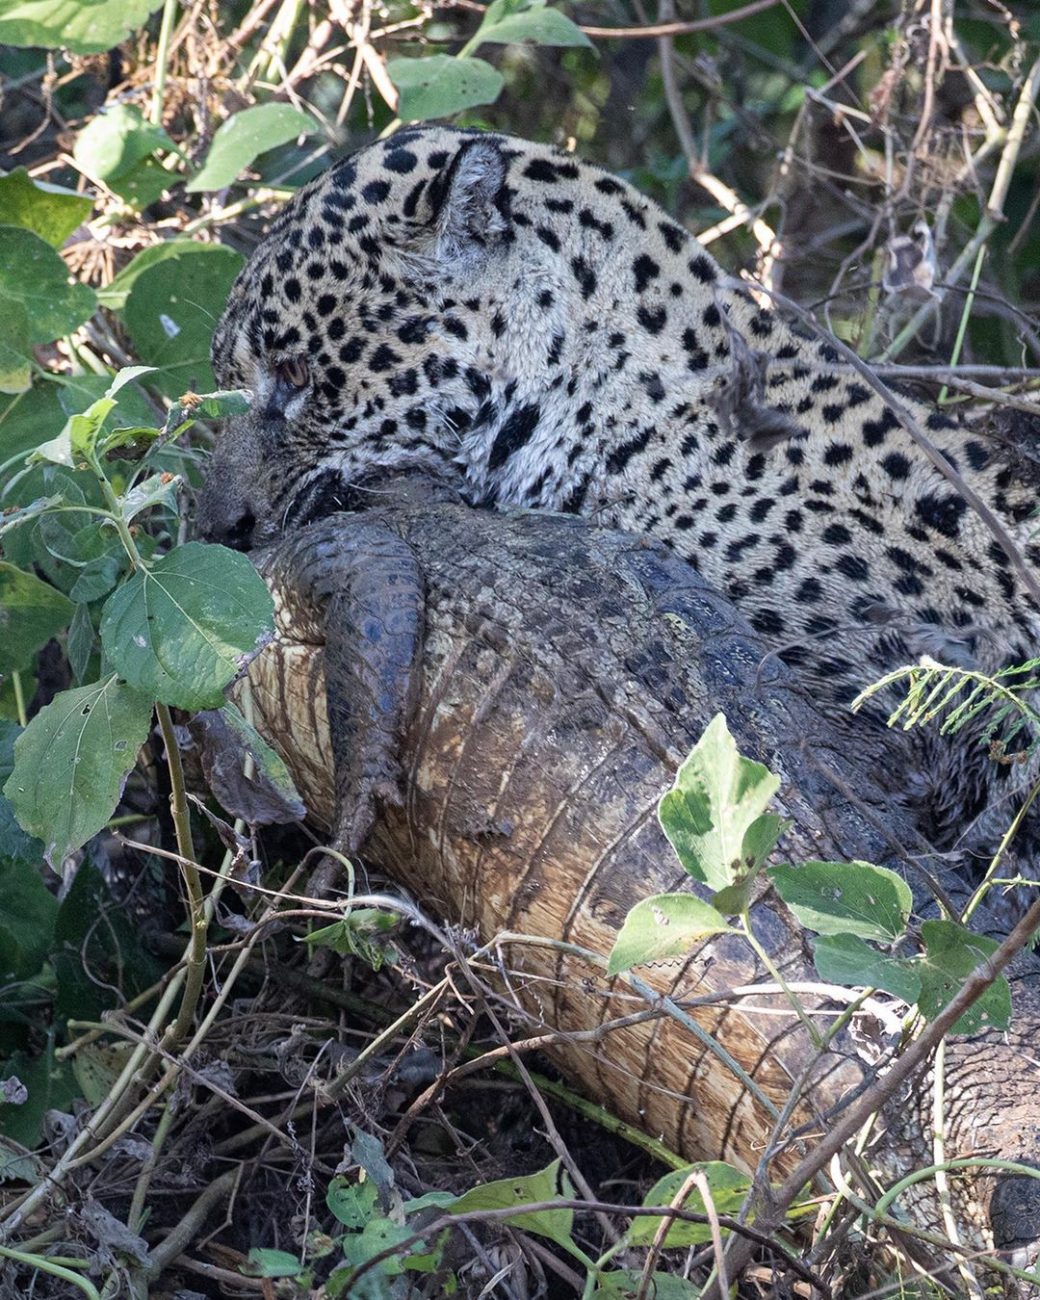 The group caught a jaguar preparing to hunt.  - Thomas Thibault/Reproduction/ND